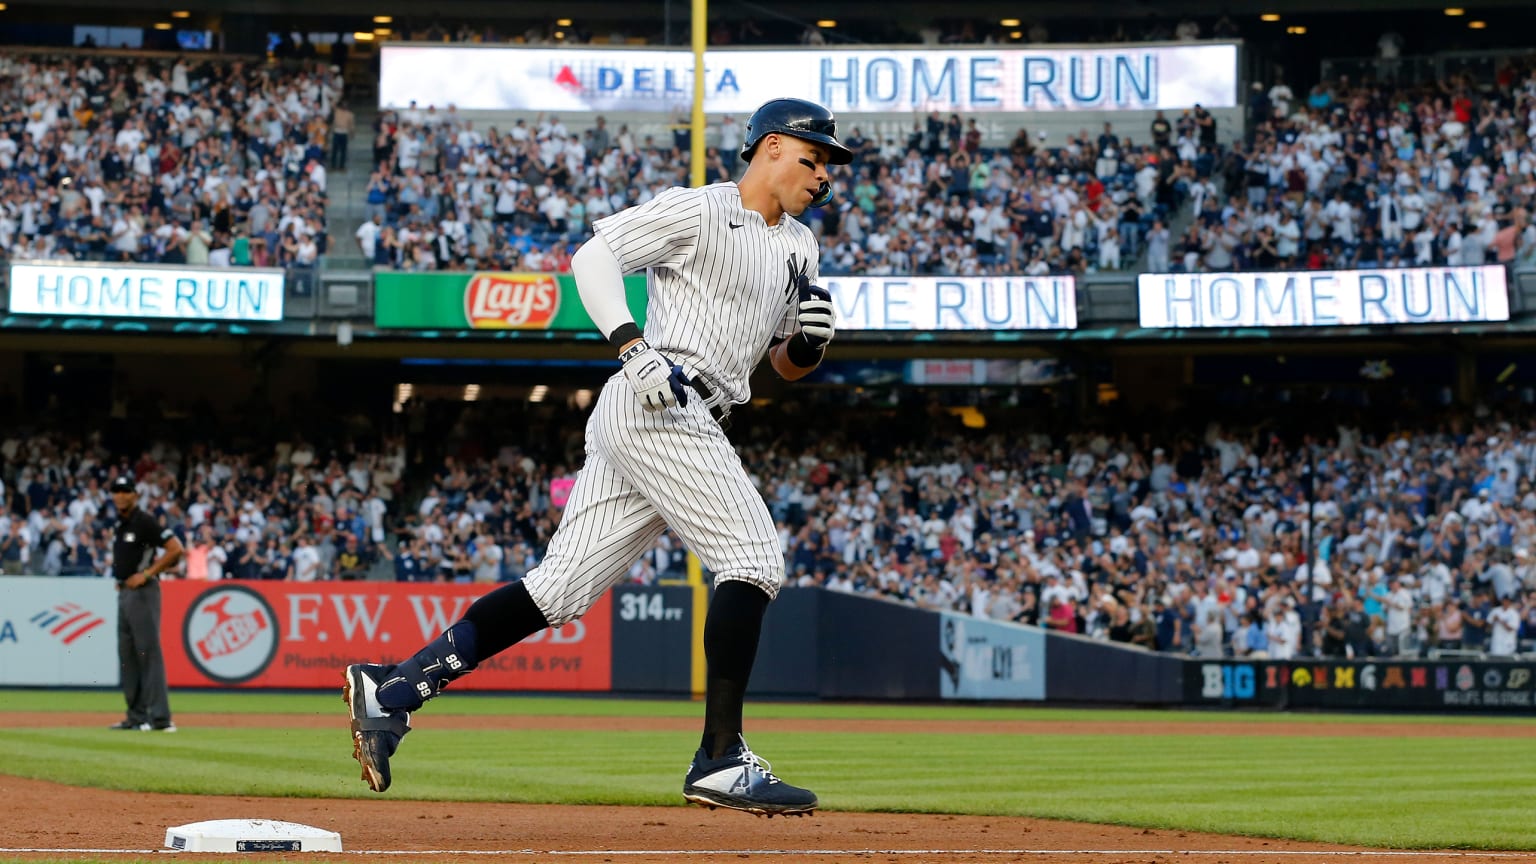 Aaron Judge rounds third base on a home run at Yankee Stadium, with ''HOME RUN'' on the video boards in the background